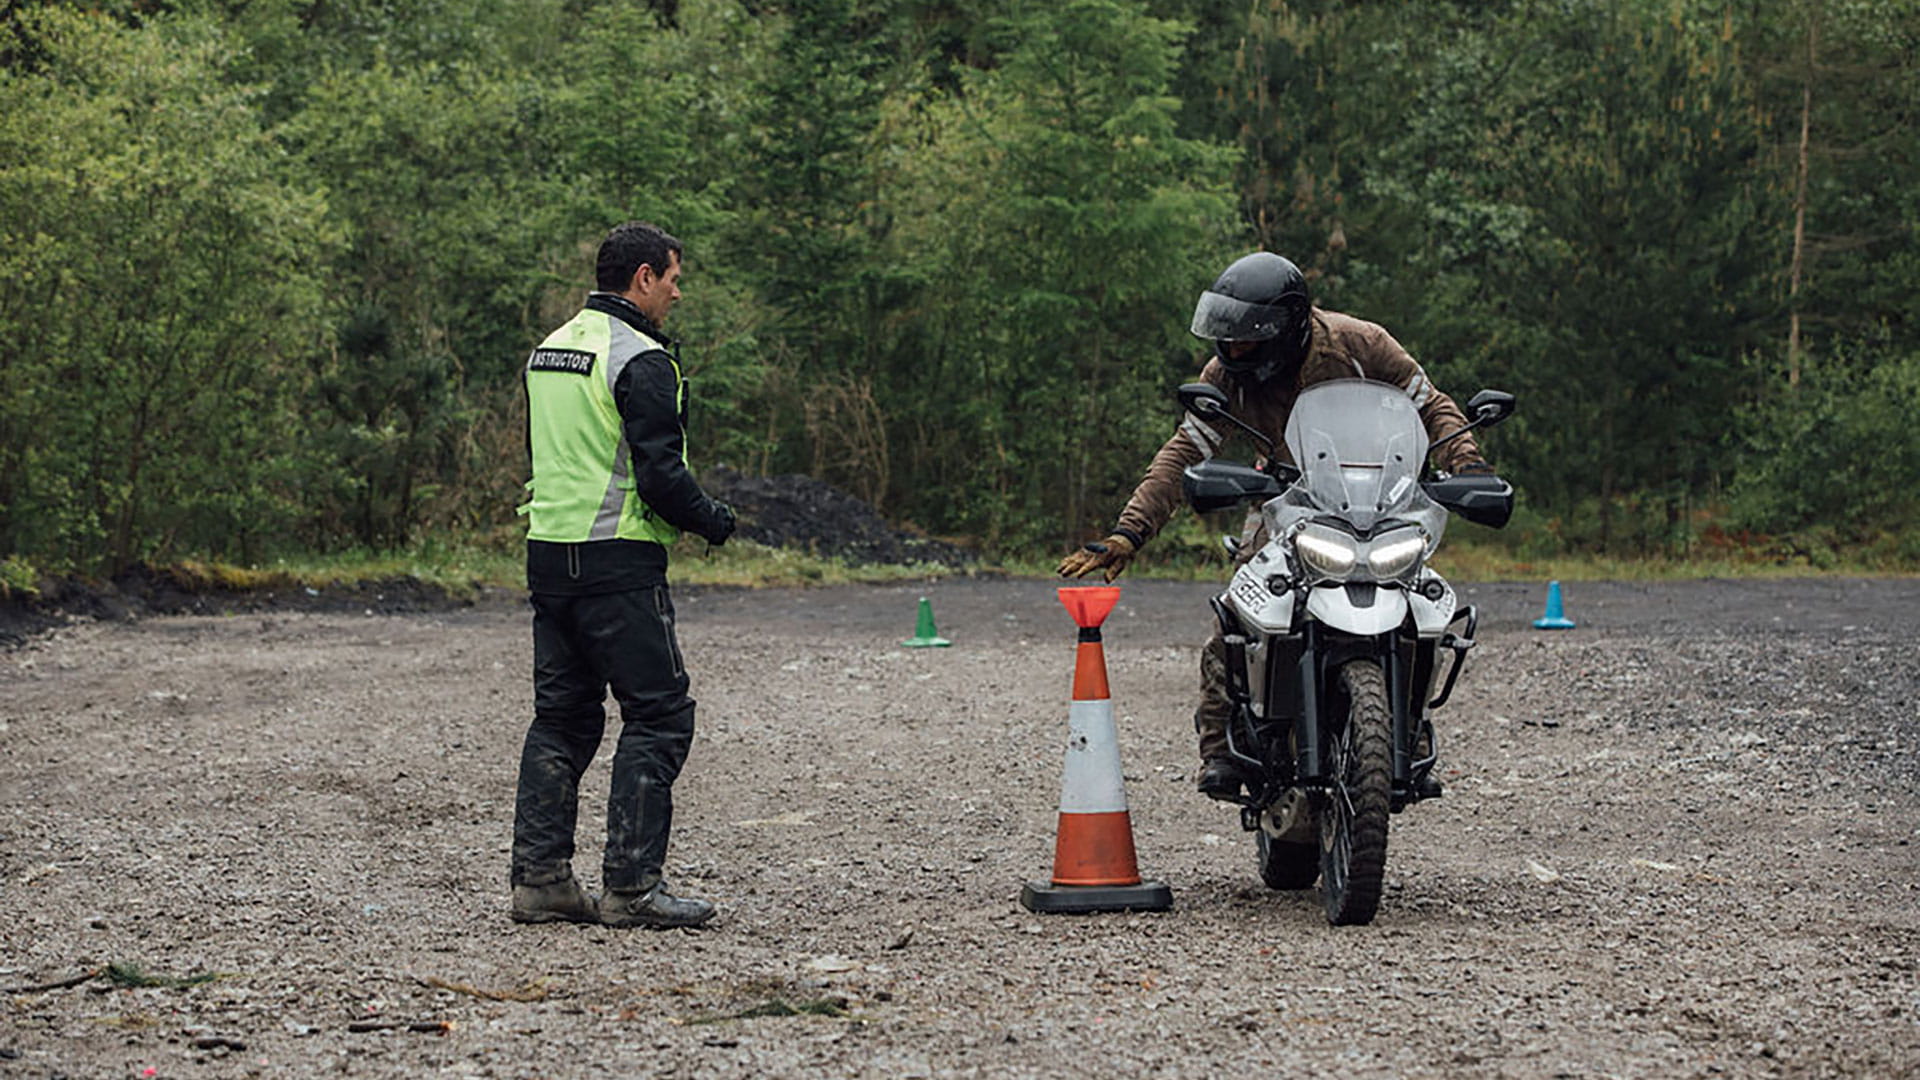 Trainer instructing a rider on basic skills of riding a Tiger 800